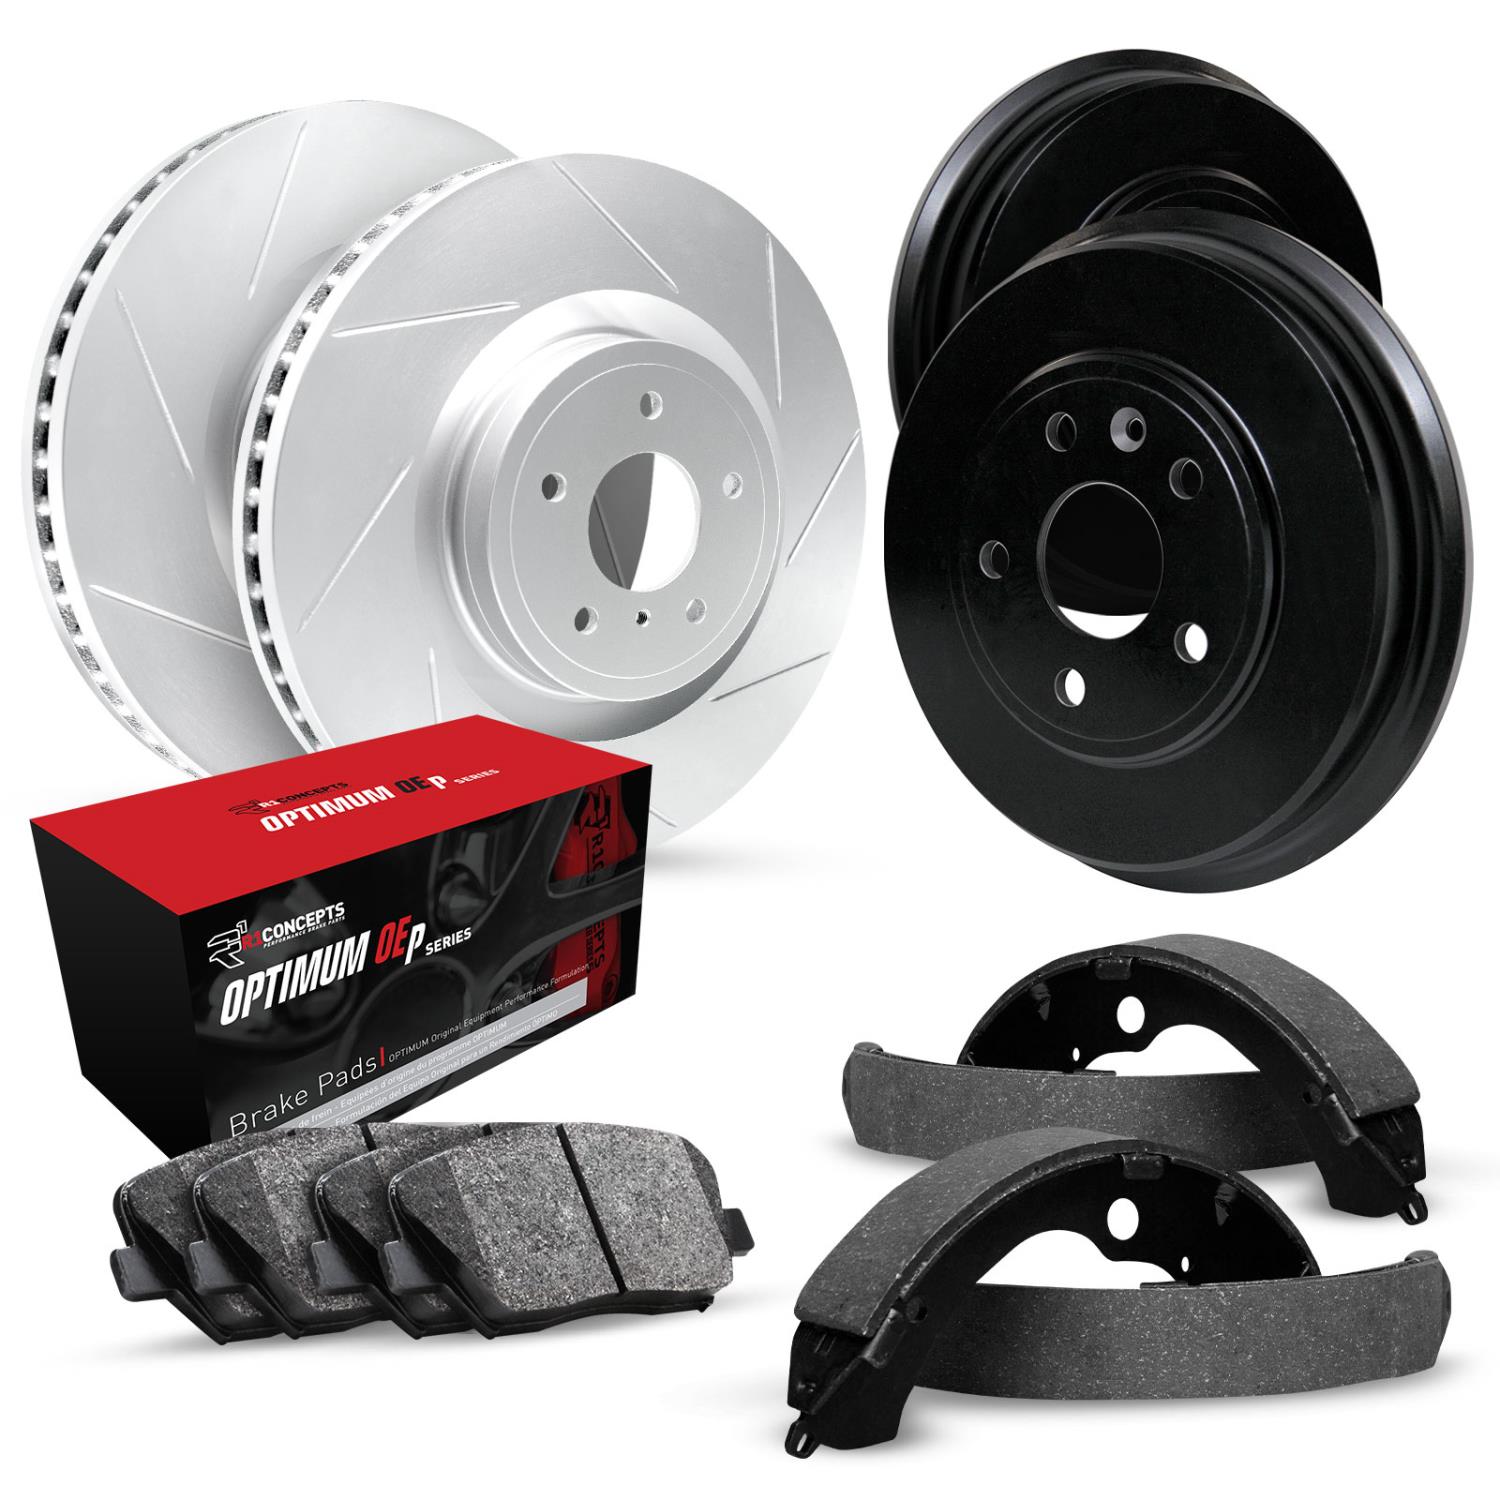 GEO-Carbon Slotted Brake Rotor & Drum Set w/Optimum OE Pads & Shoes, 1990-2000 GM, Position: Front & Rear